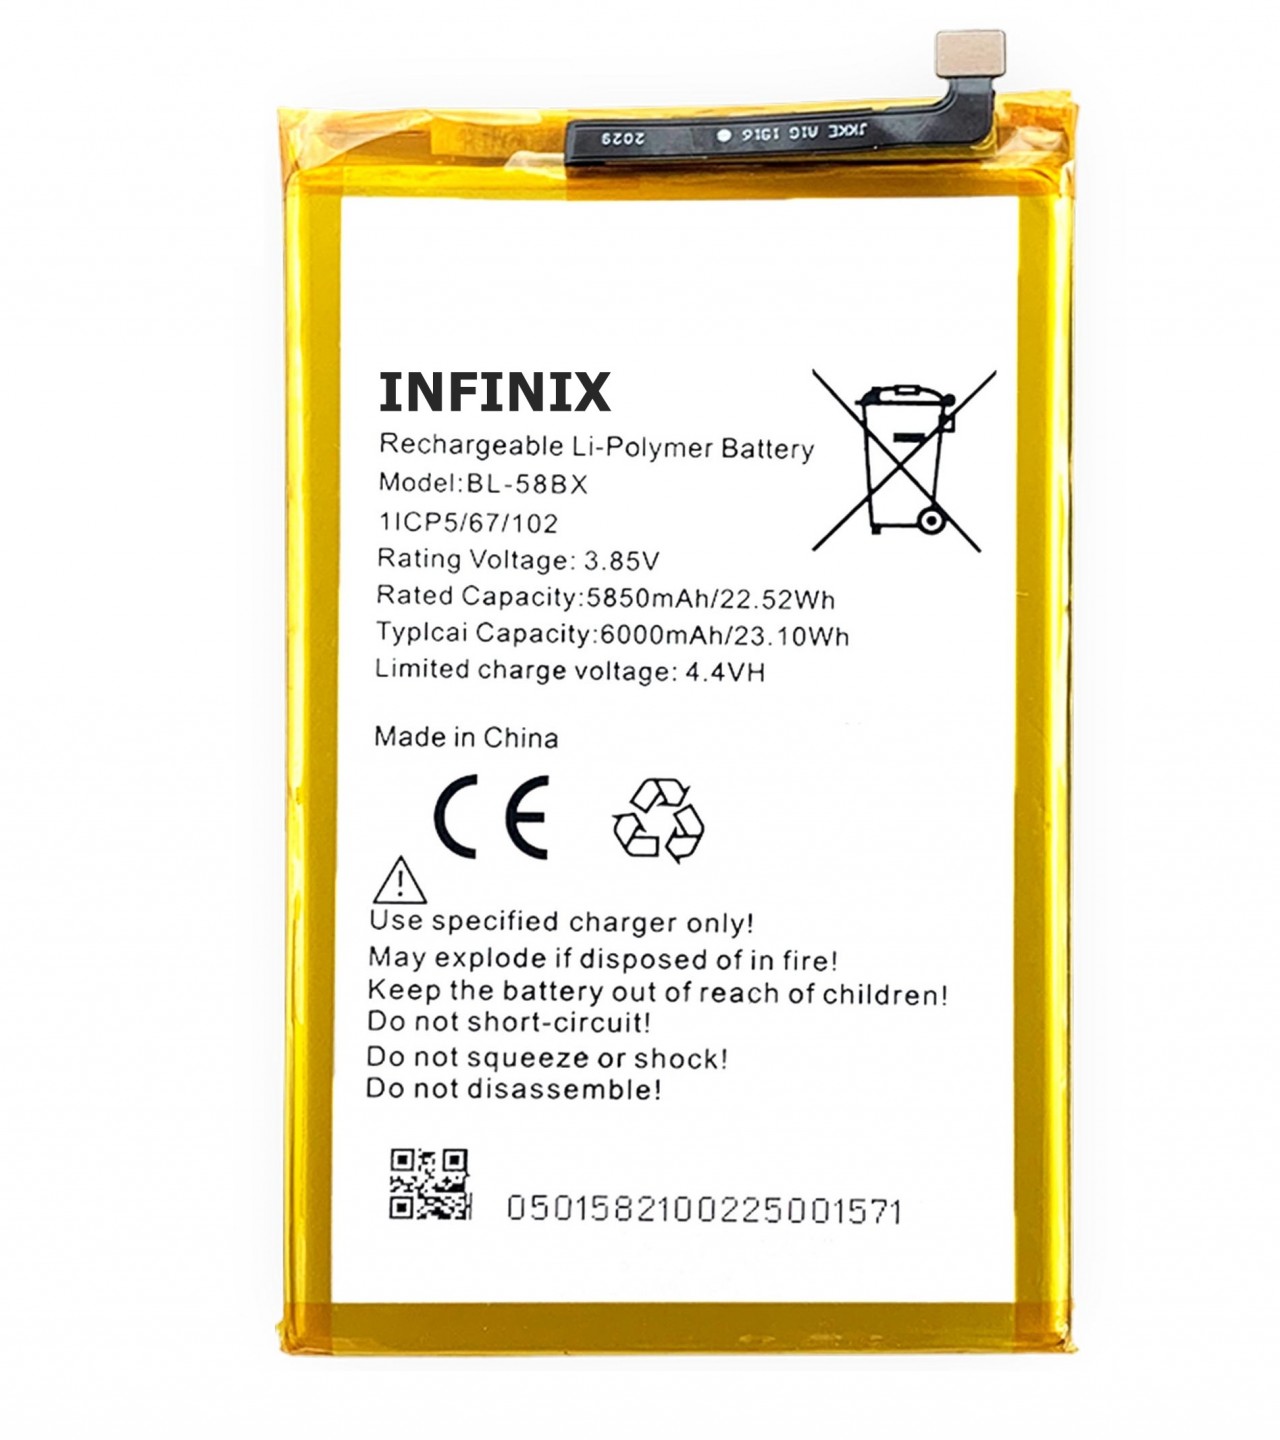 BL-58BX Infinix Hot 9 Play (X680) Battery BL58BX Battery with 6000mAh Capacity_Silver